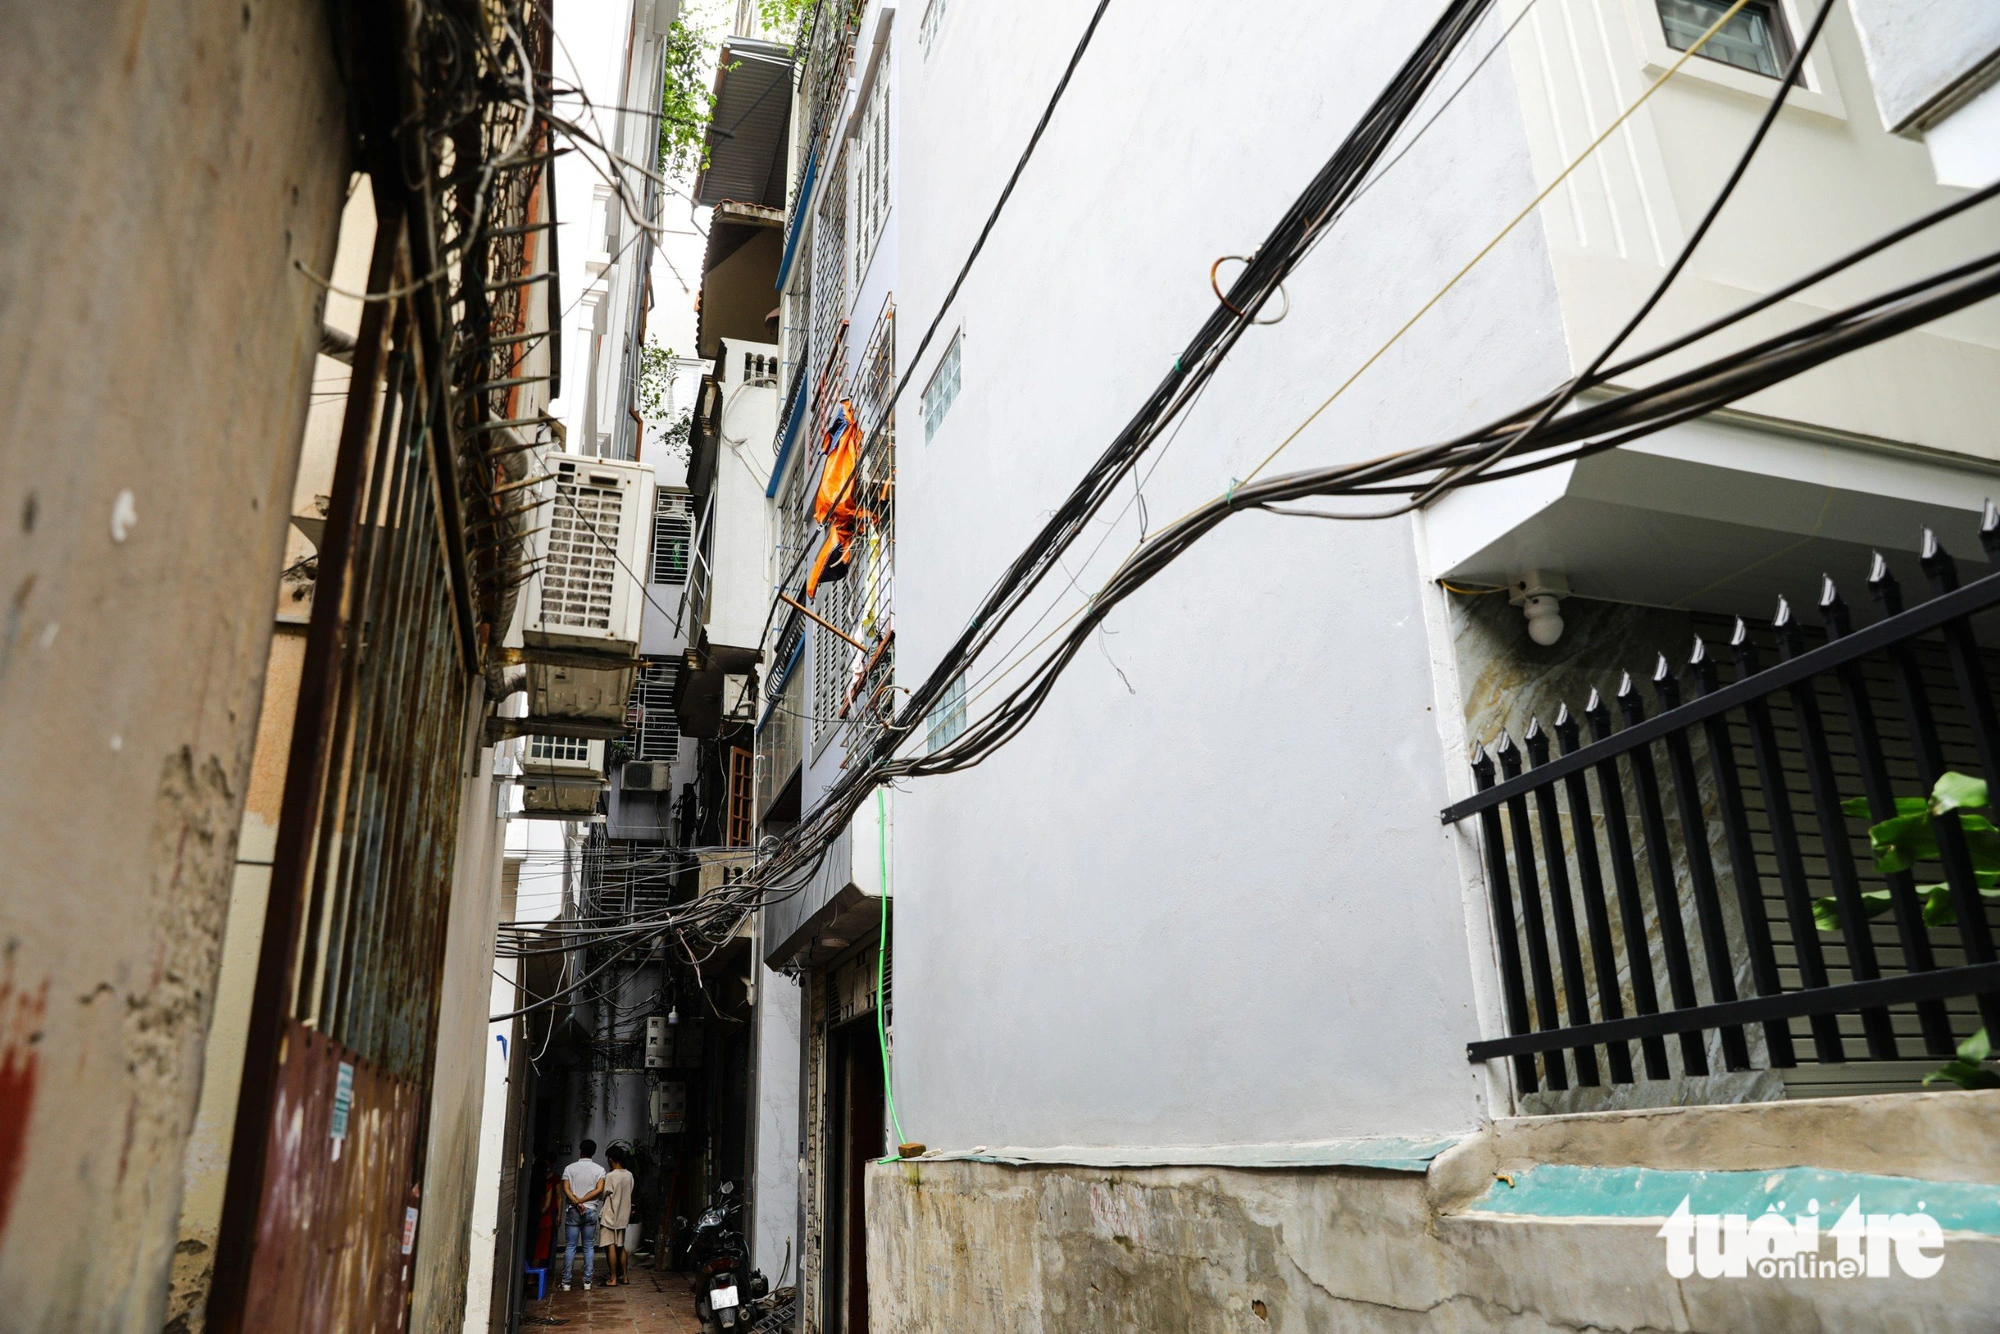 The narrow way to an apartment block down an alley on Khuong Ha Street in Thanh Xuan District, Hanoi which burst into flames several days ago. Photo: Danh Khang / Tuoi Tre